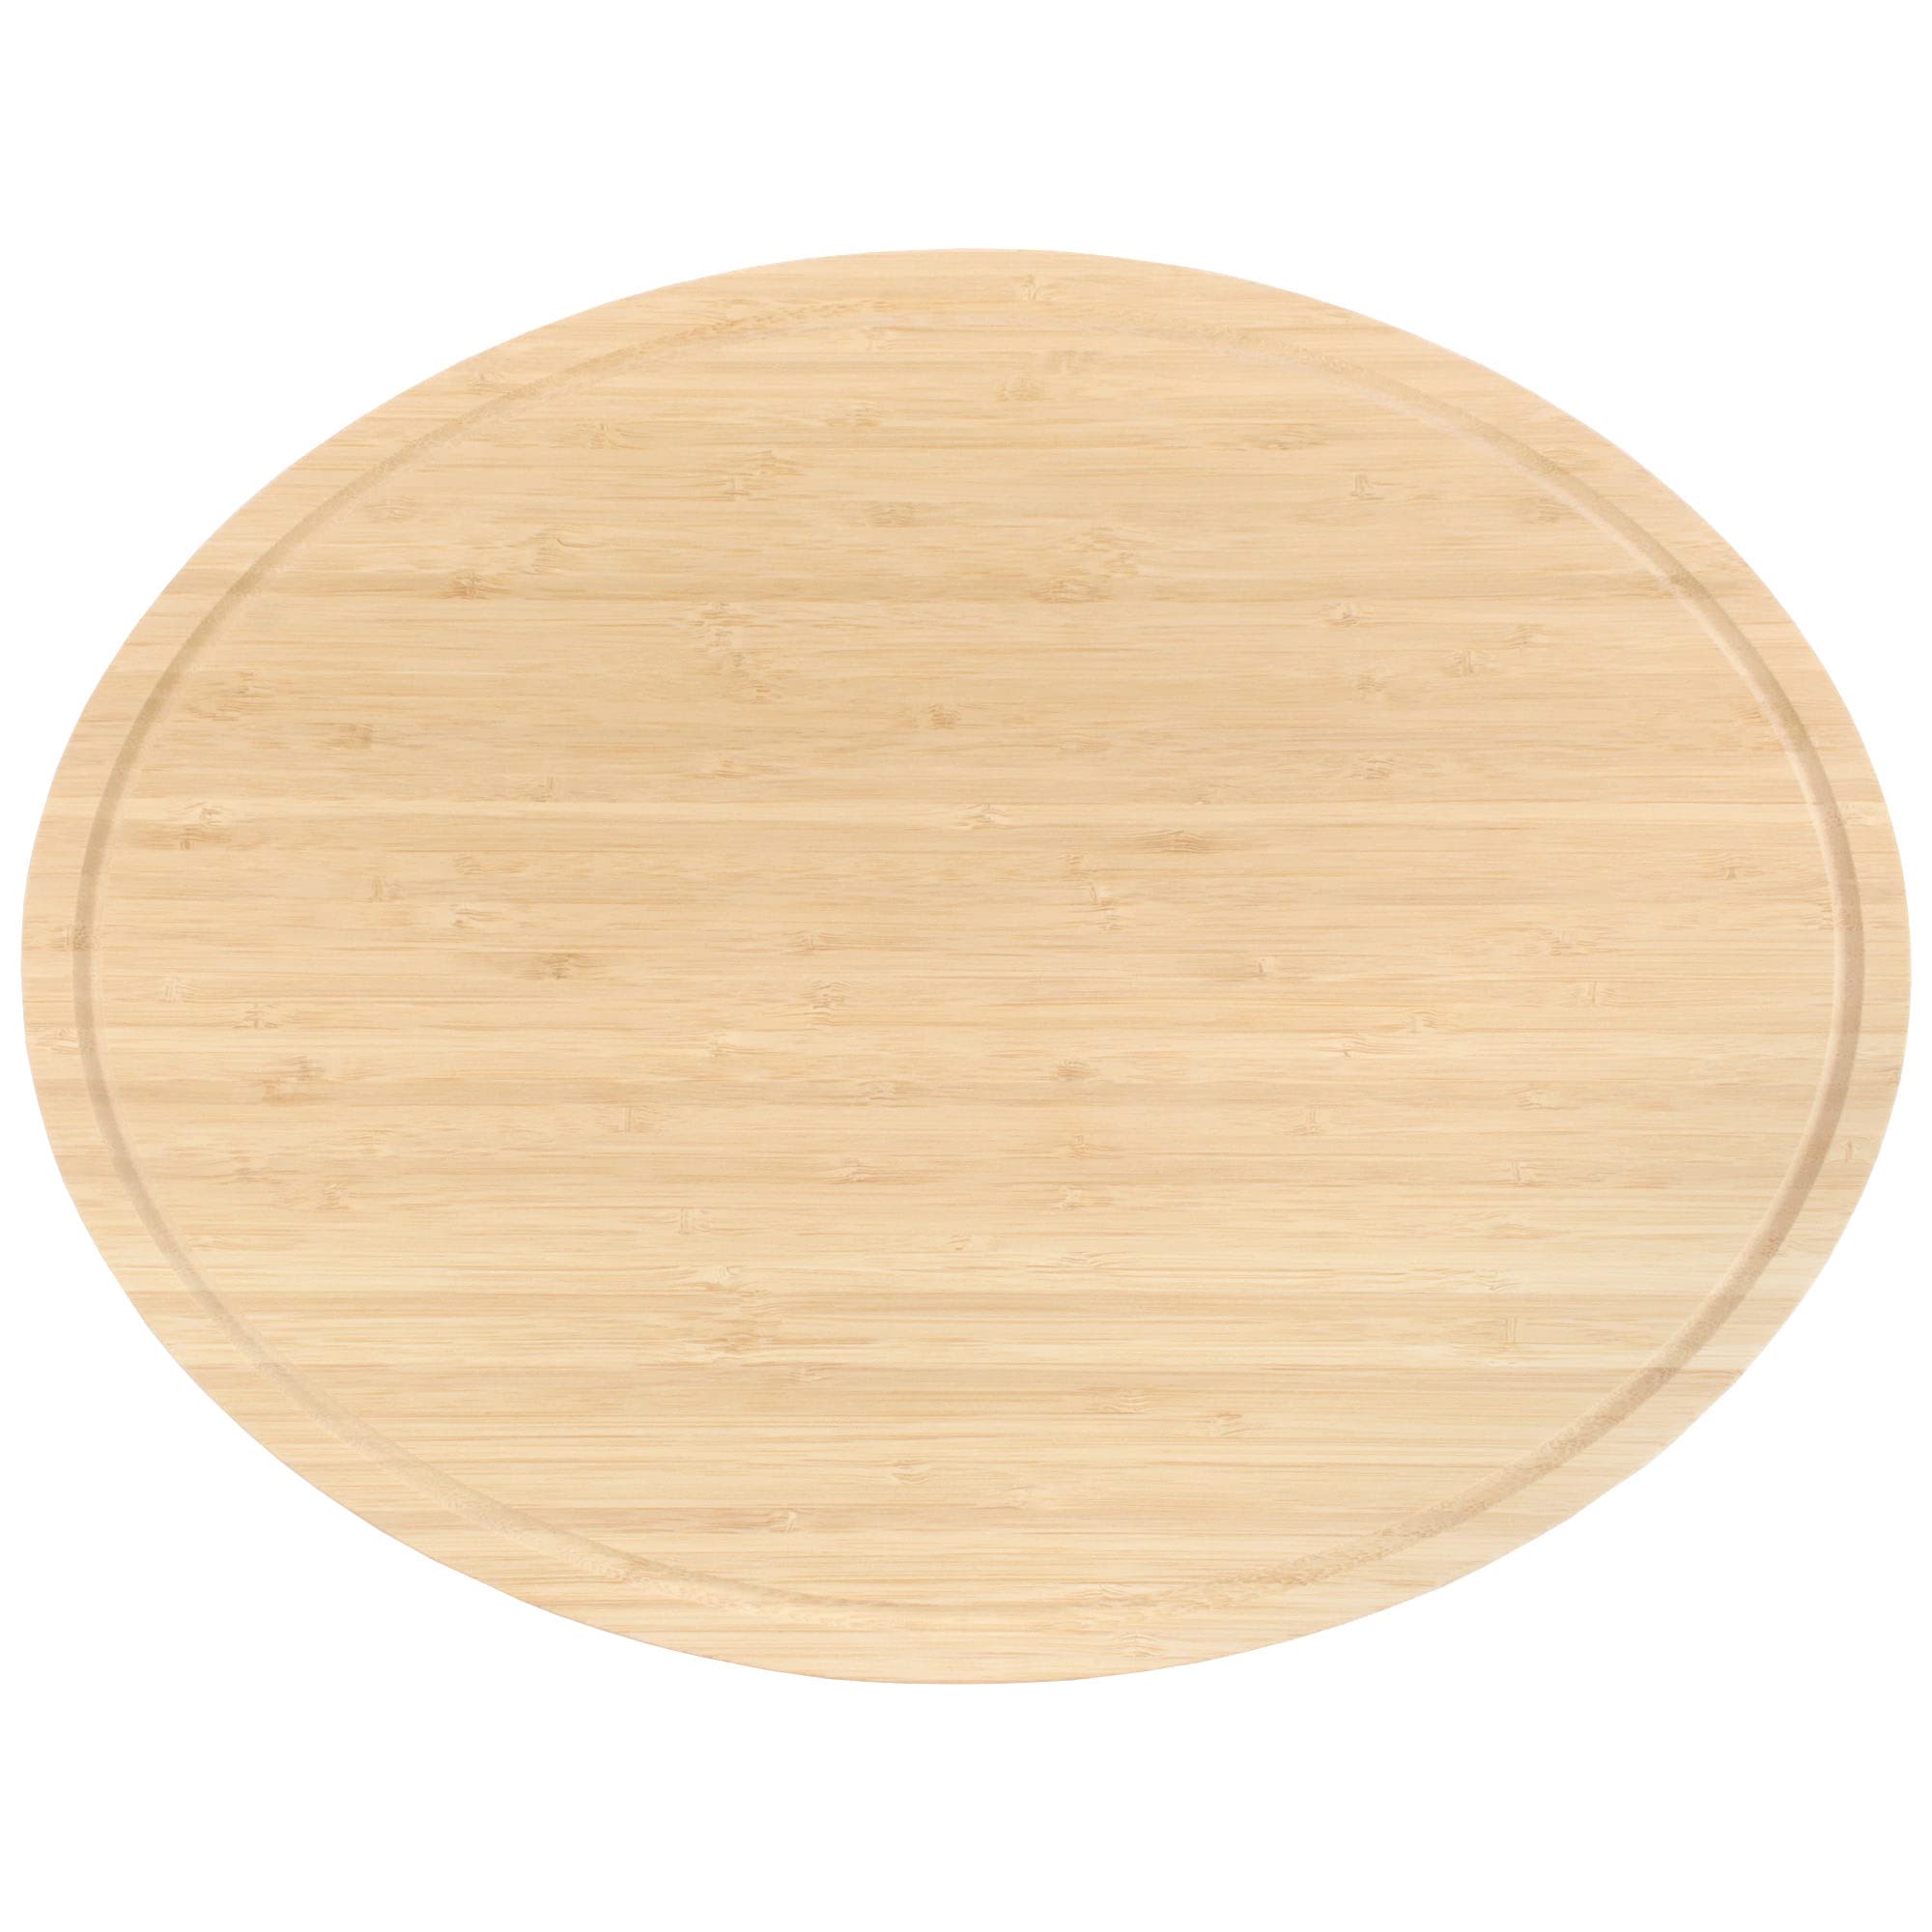 Shangrun Heavy Duty Premium Bamboo Oval Shaped Cutting and Serving Board